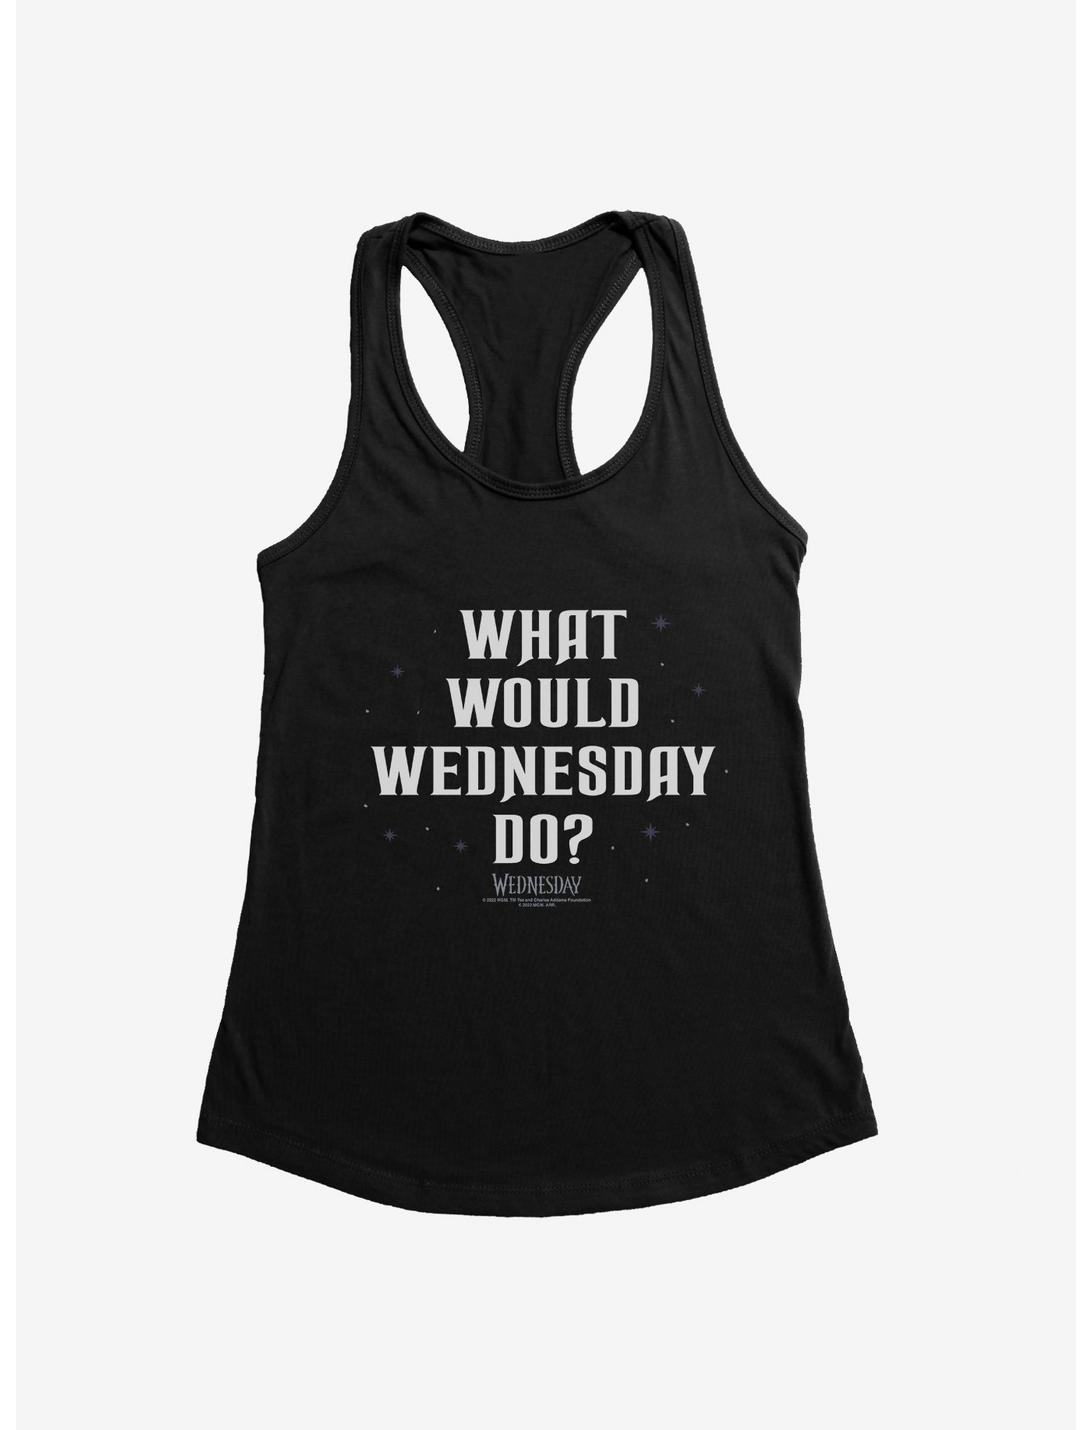 Wednesday What Would Wednesday Do? Womens Tank Top, BLACK, hi-res